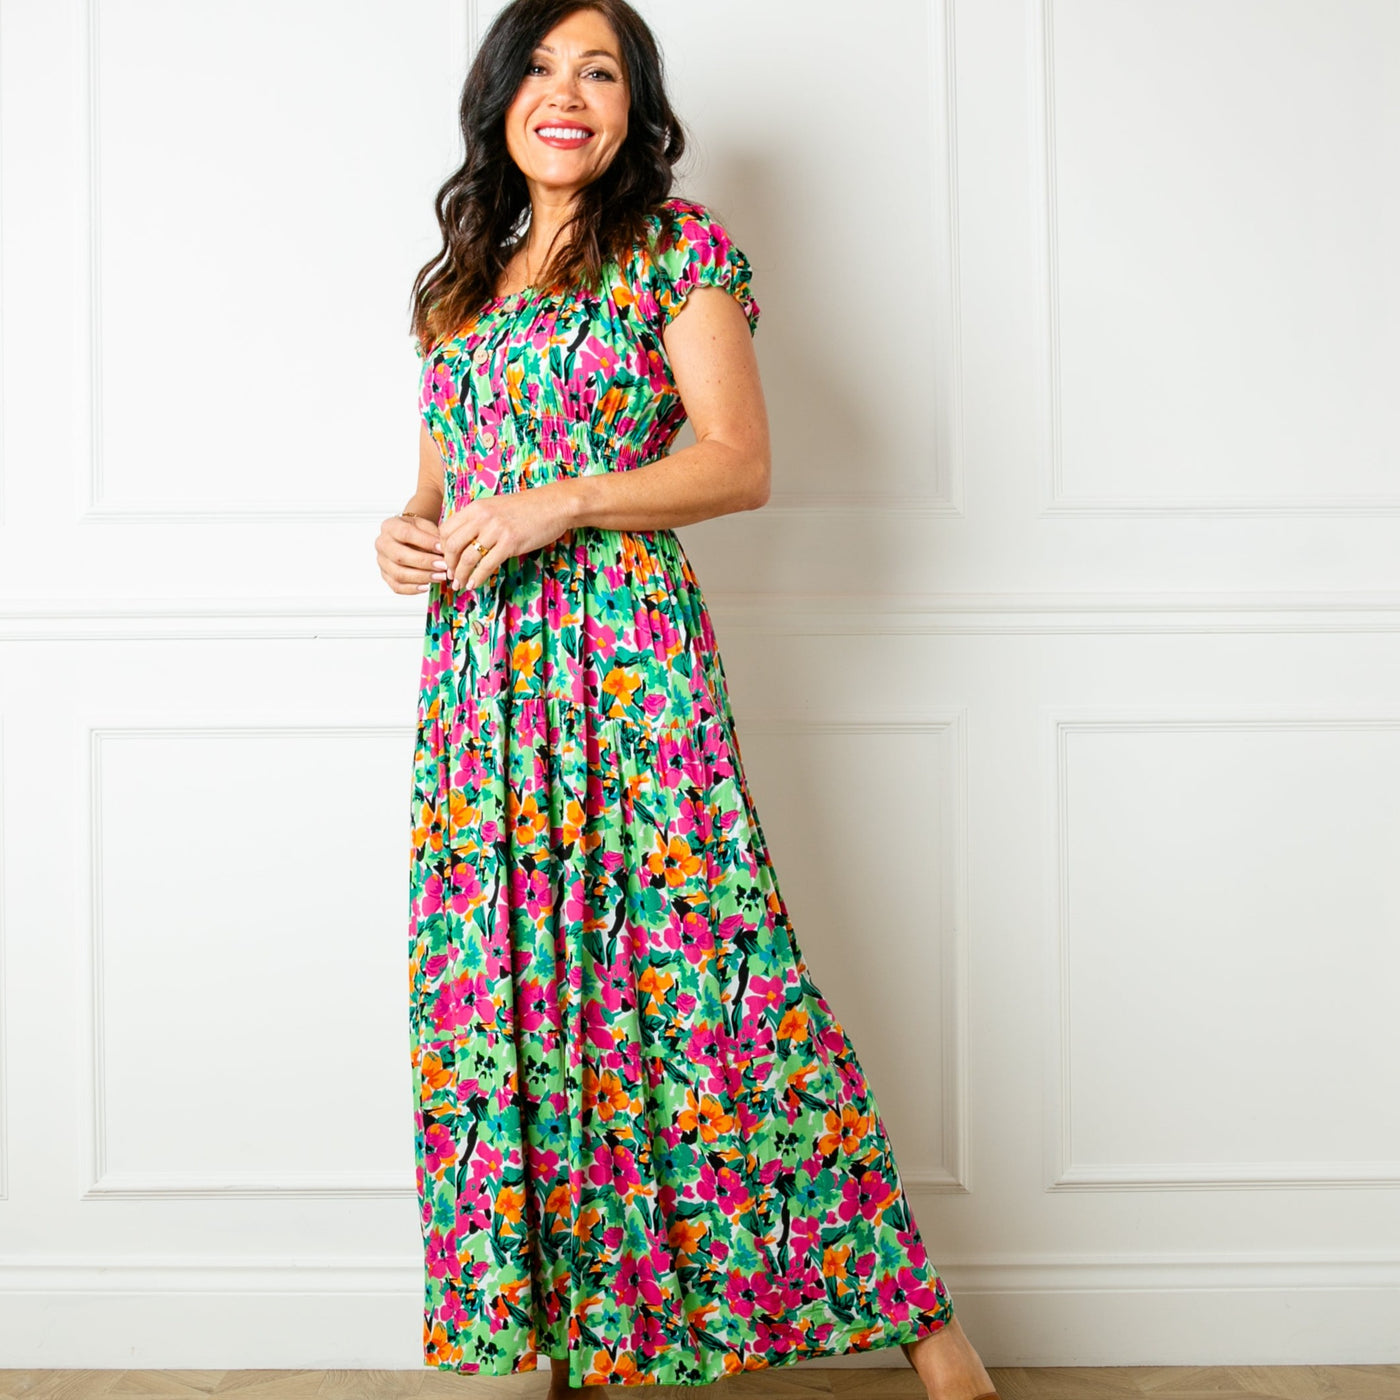 The floral green Printed Button Maxi Dress with short puffy elasticated sleeves that can be worn on or off the shoulder